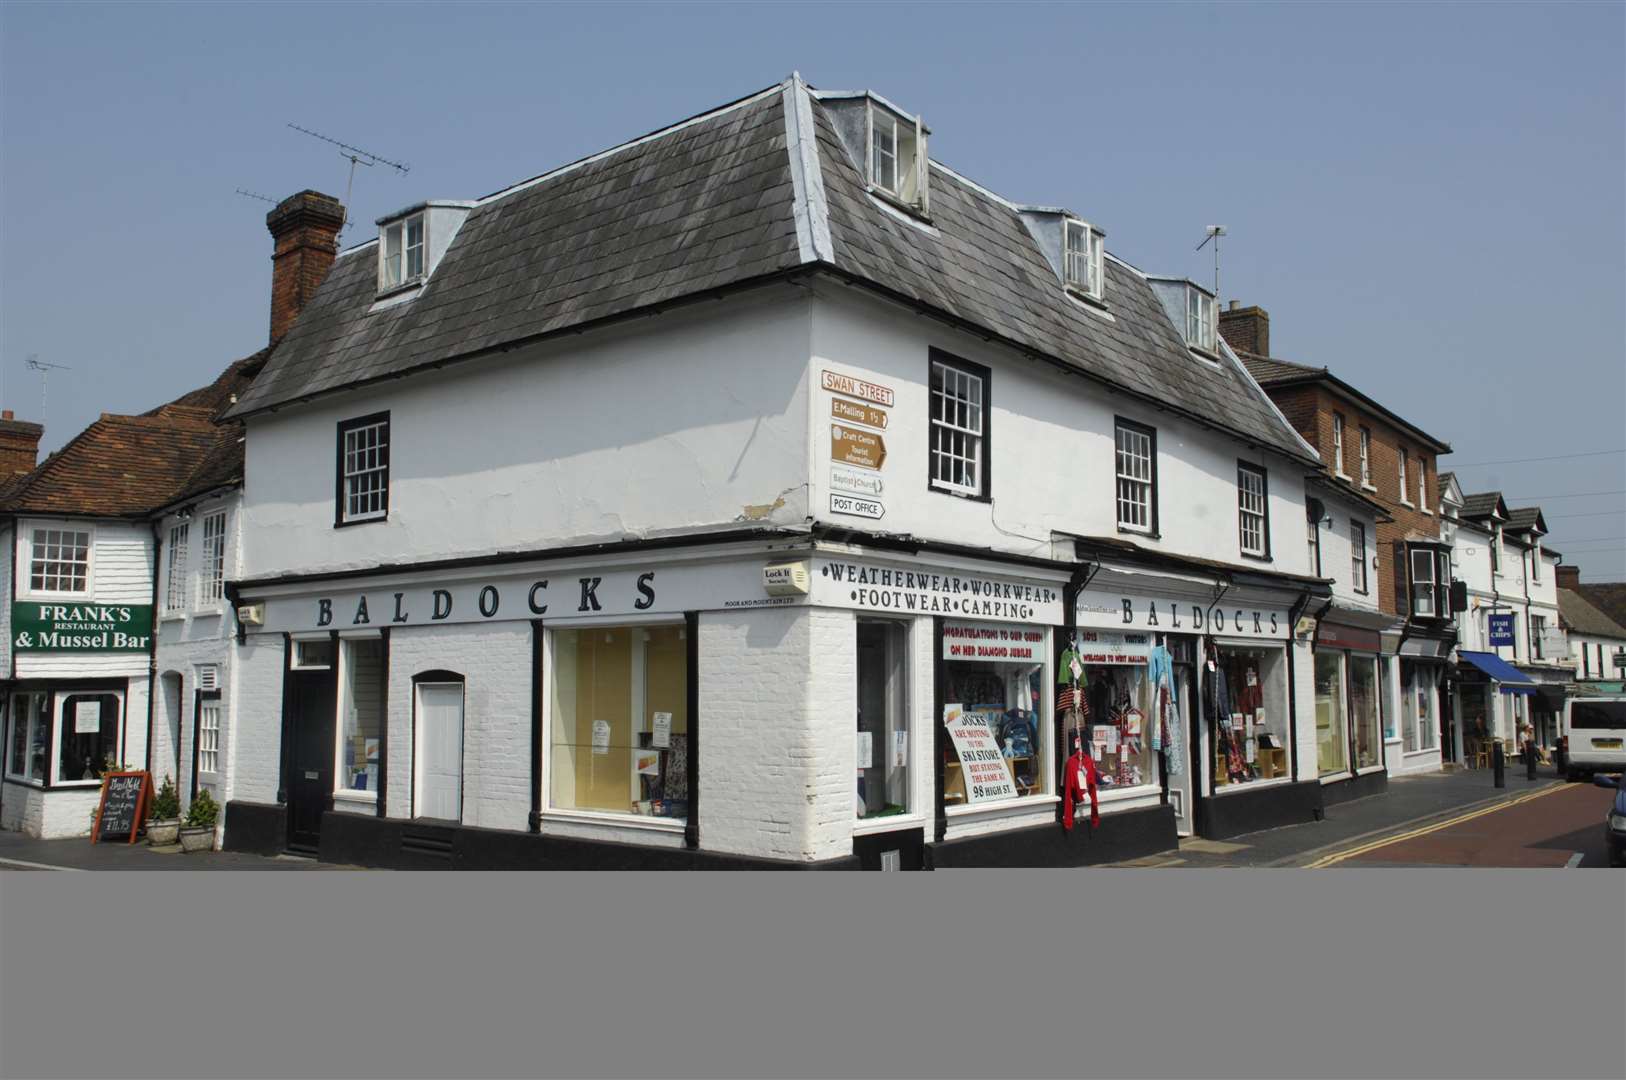 Baldocks outdoor store in 2005. The building is now occupied by the Soles with Heart and Dressed by Dee